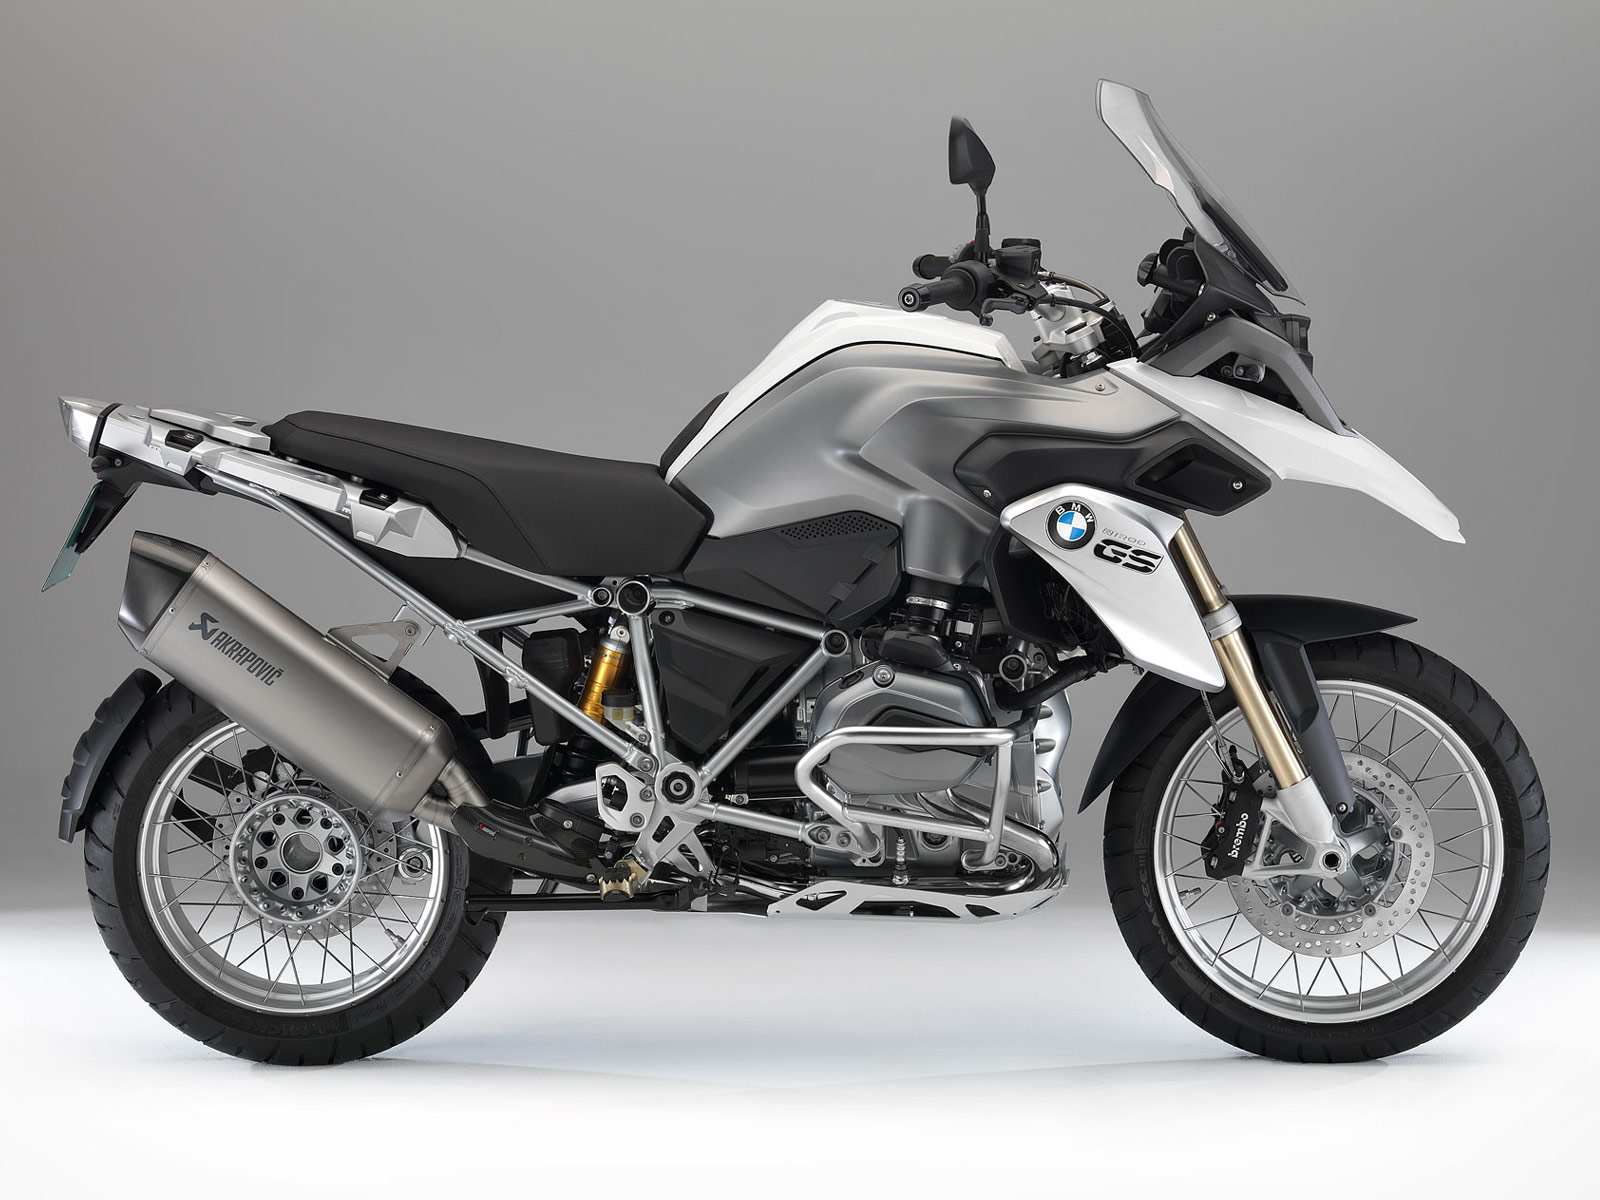 BMW Insurance Information 2013 R1200GS Specifications